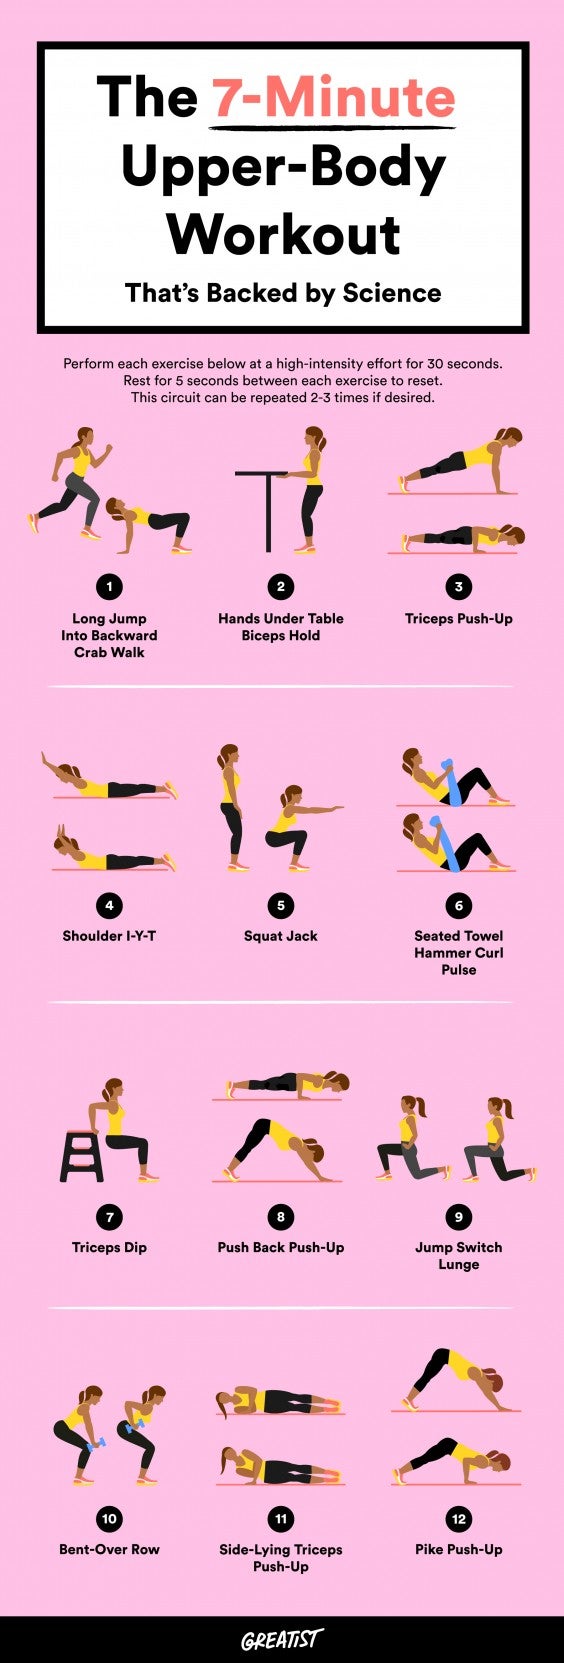 7 Minute Workout For Your Upper Body You Can Do A Home